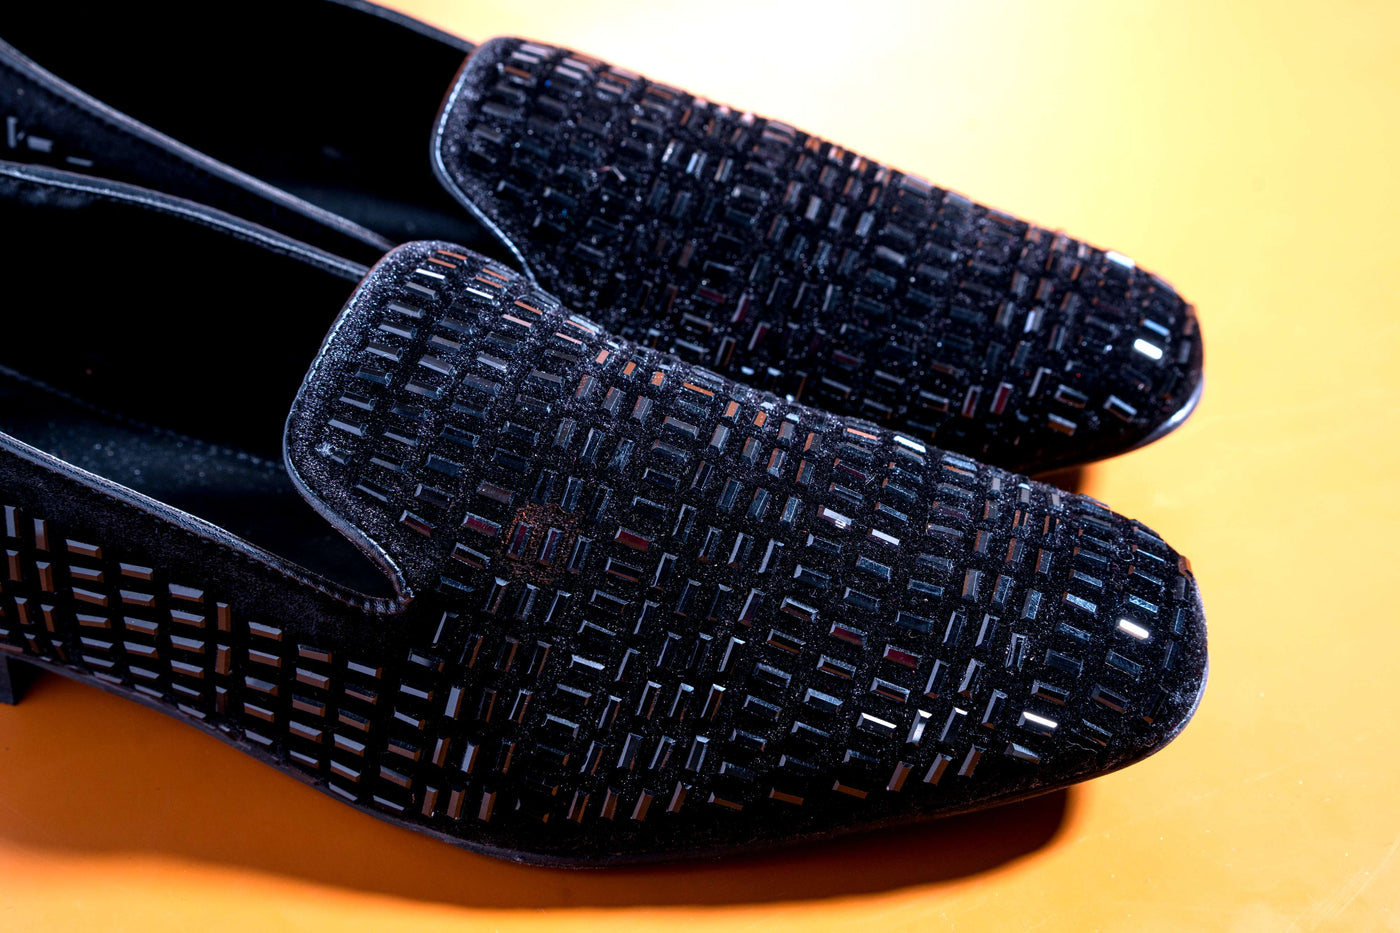 Stylish Men's Fashion Wedding Imported Studded Black Moccasins High Quality Slip On Flat Loafer-Unique and Classy